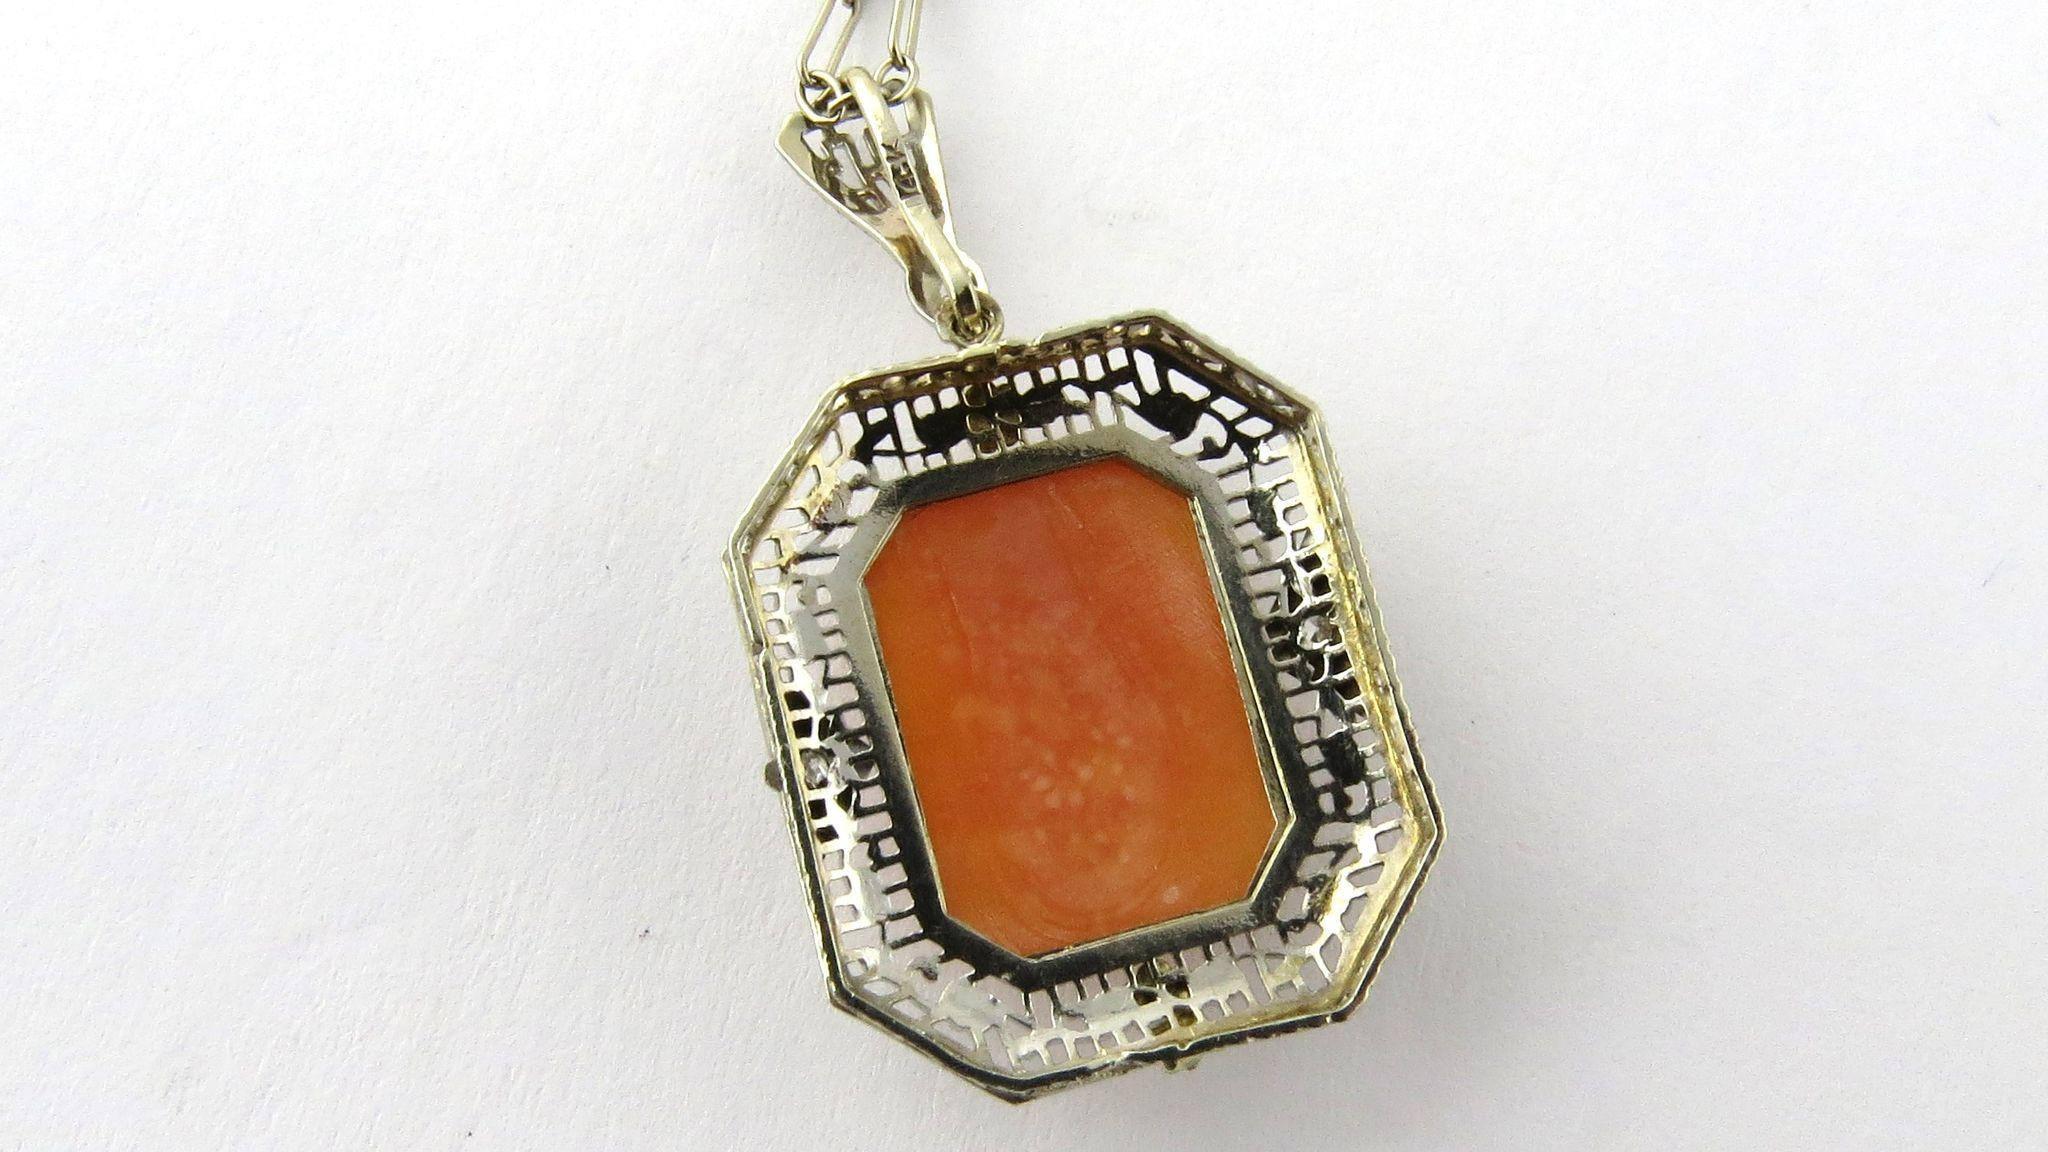 Women's Antique Early Art Deco 14K White and Yellow Gold Filigree Cameo Pendant w/ Chain